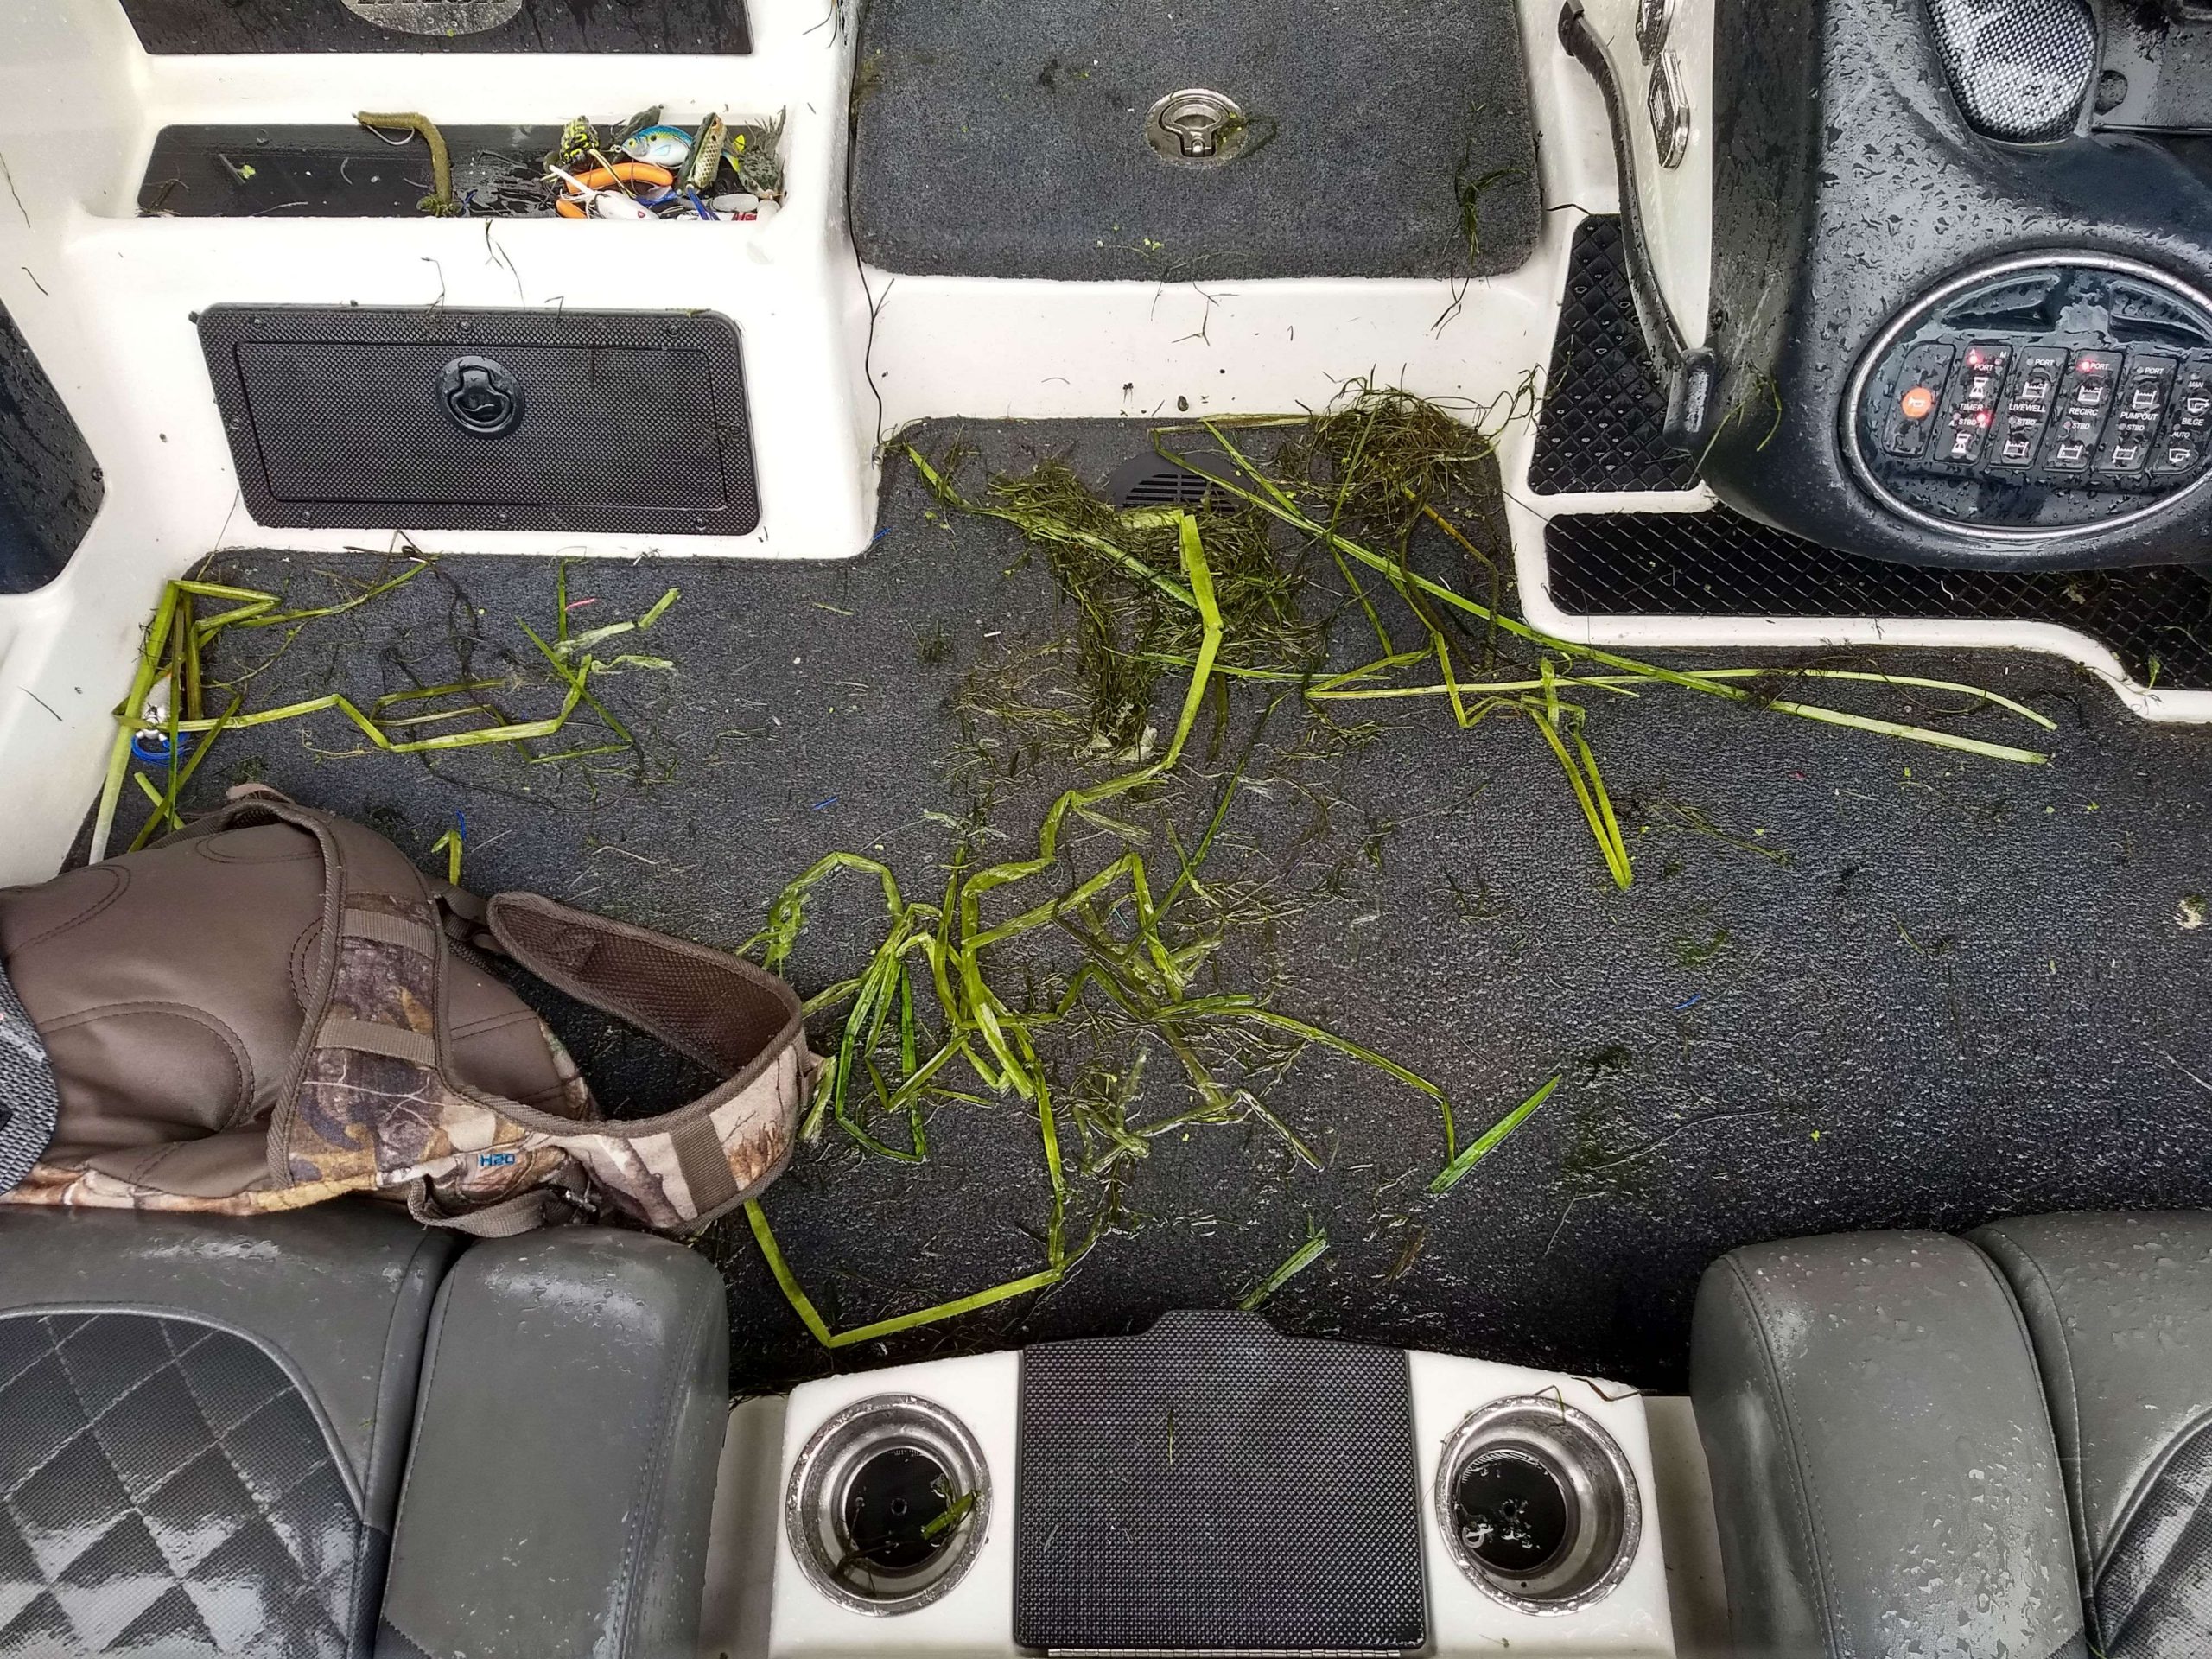 Salad anyone? This can be found on the floor of most Elite boats today and most likely every day of the event.